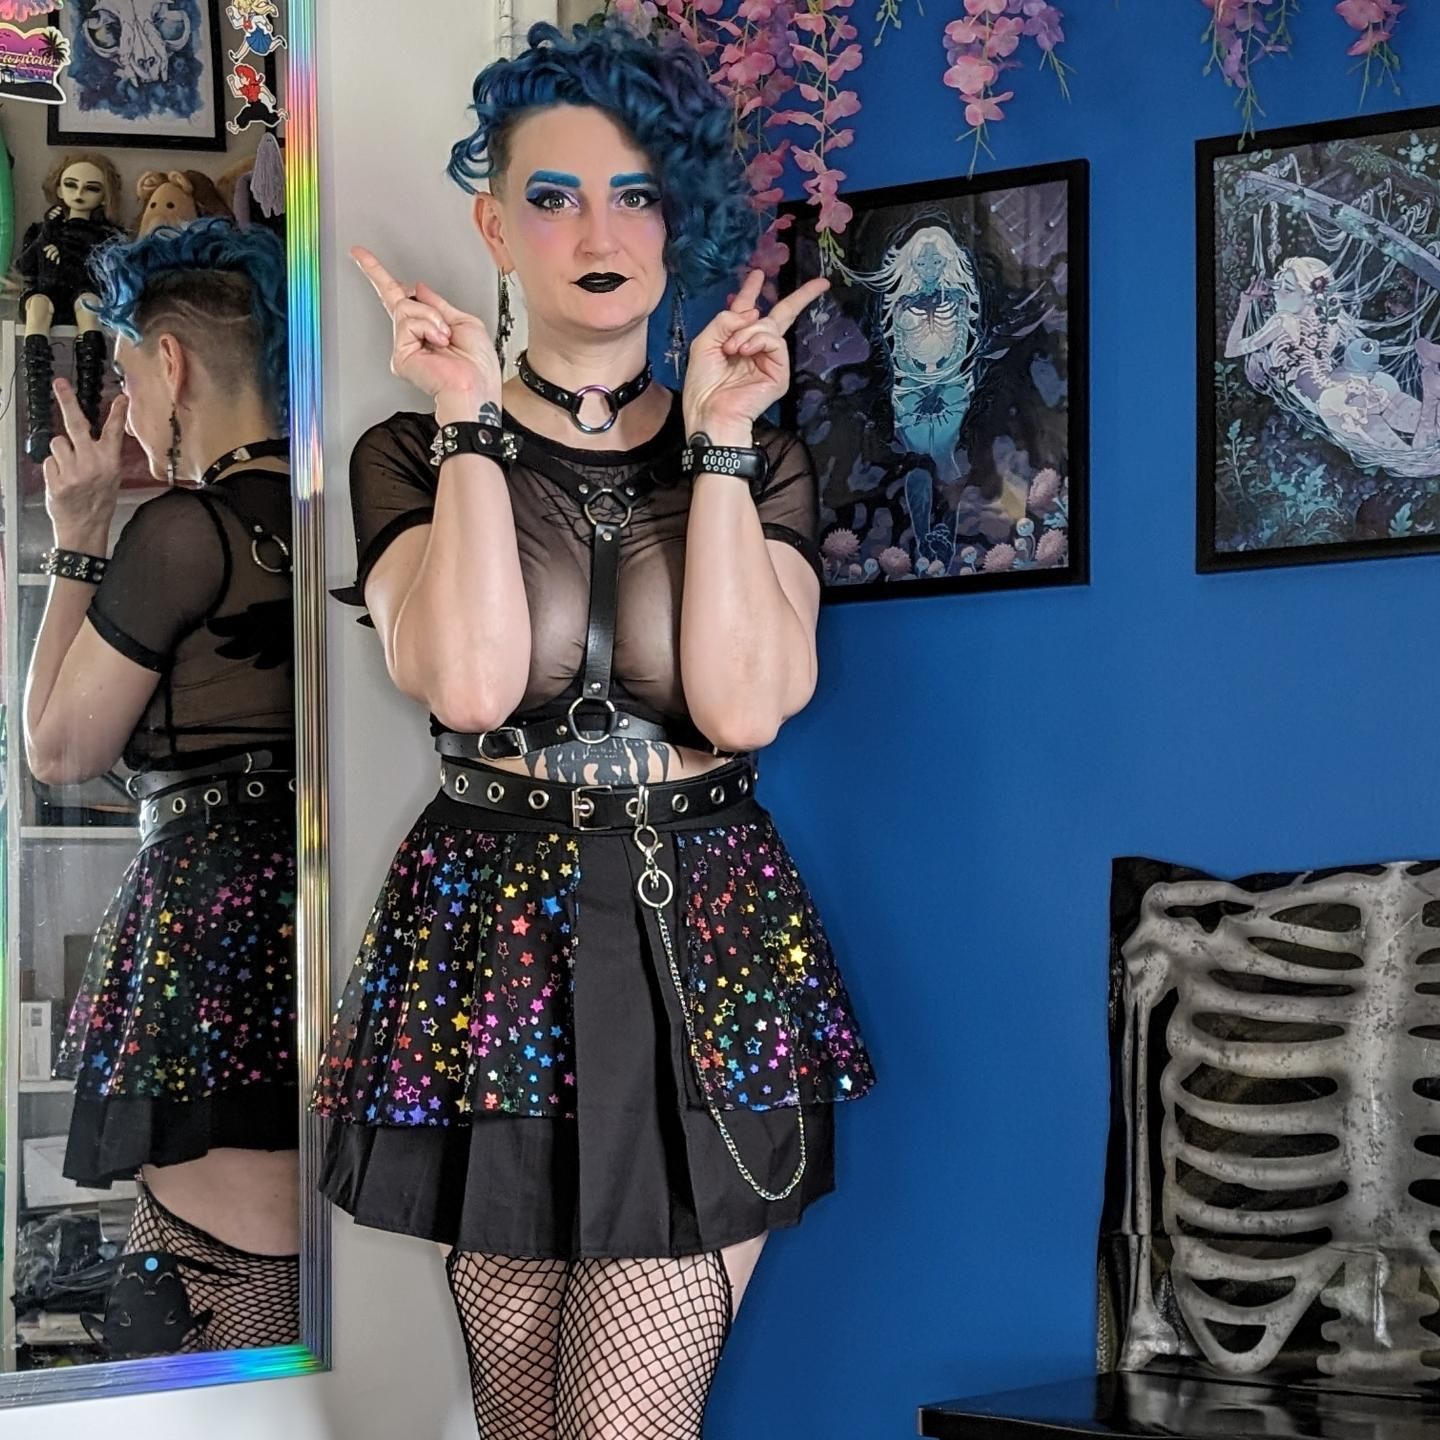 Where are you going this weekend? Those in the know, know where I'll be. 
#bluehair #gothfashion #raveoutfit #graver #fishnets